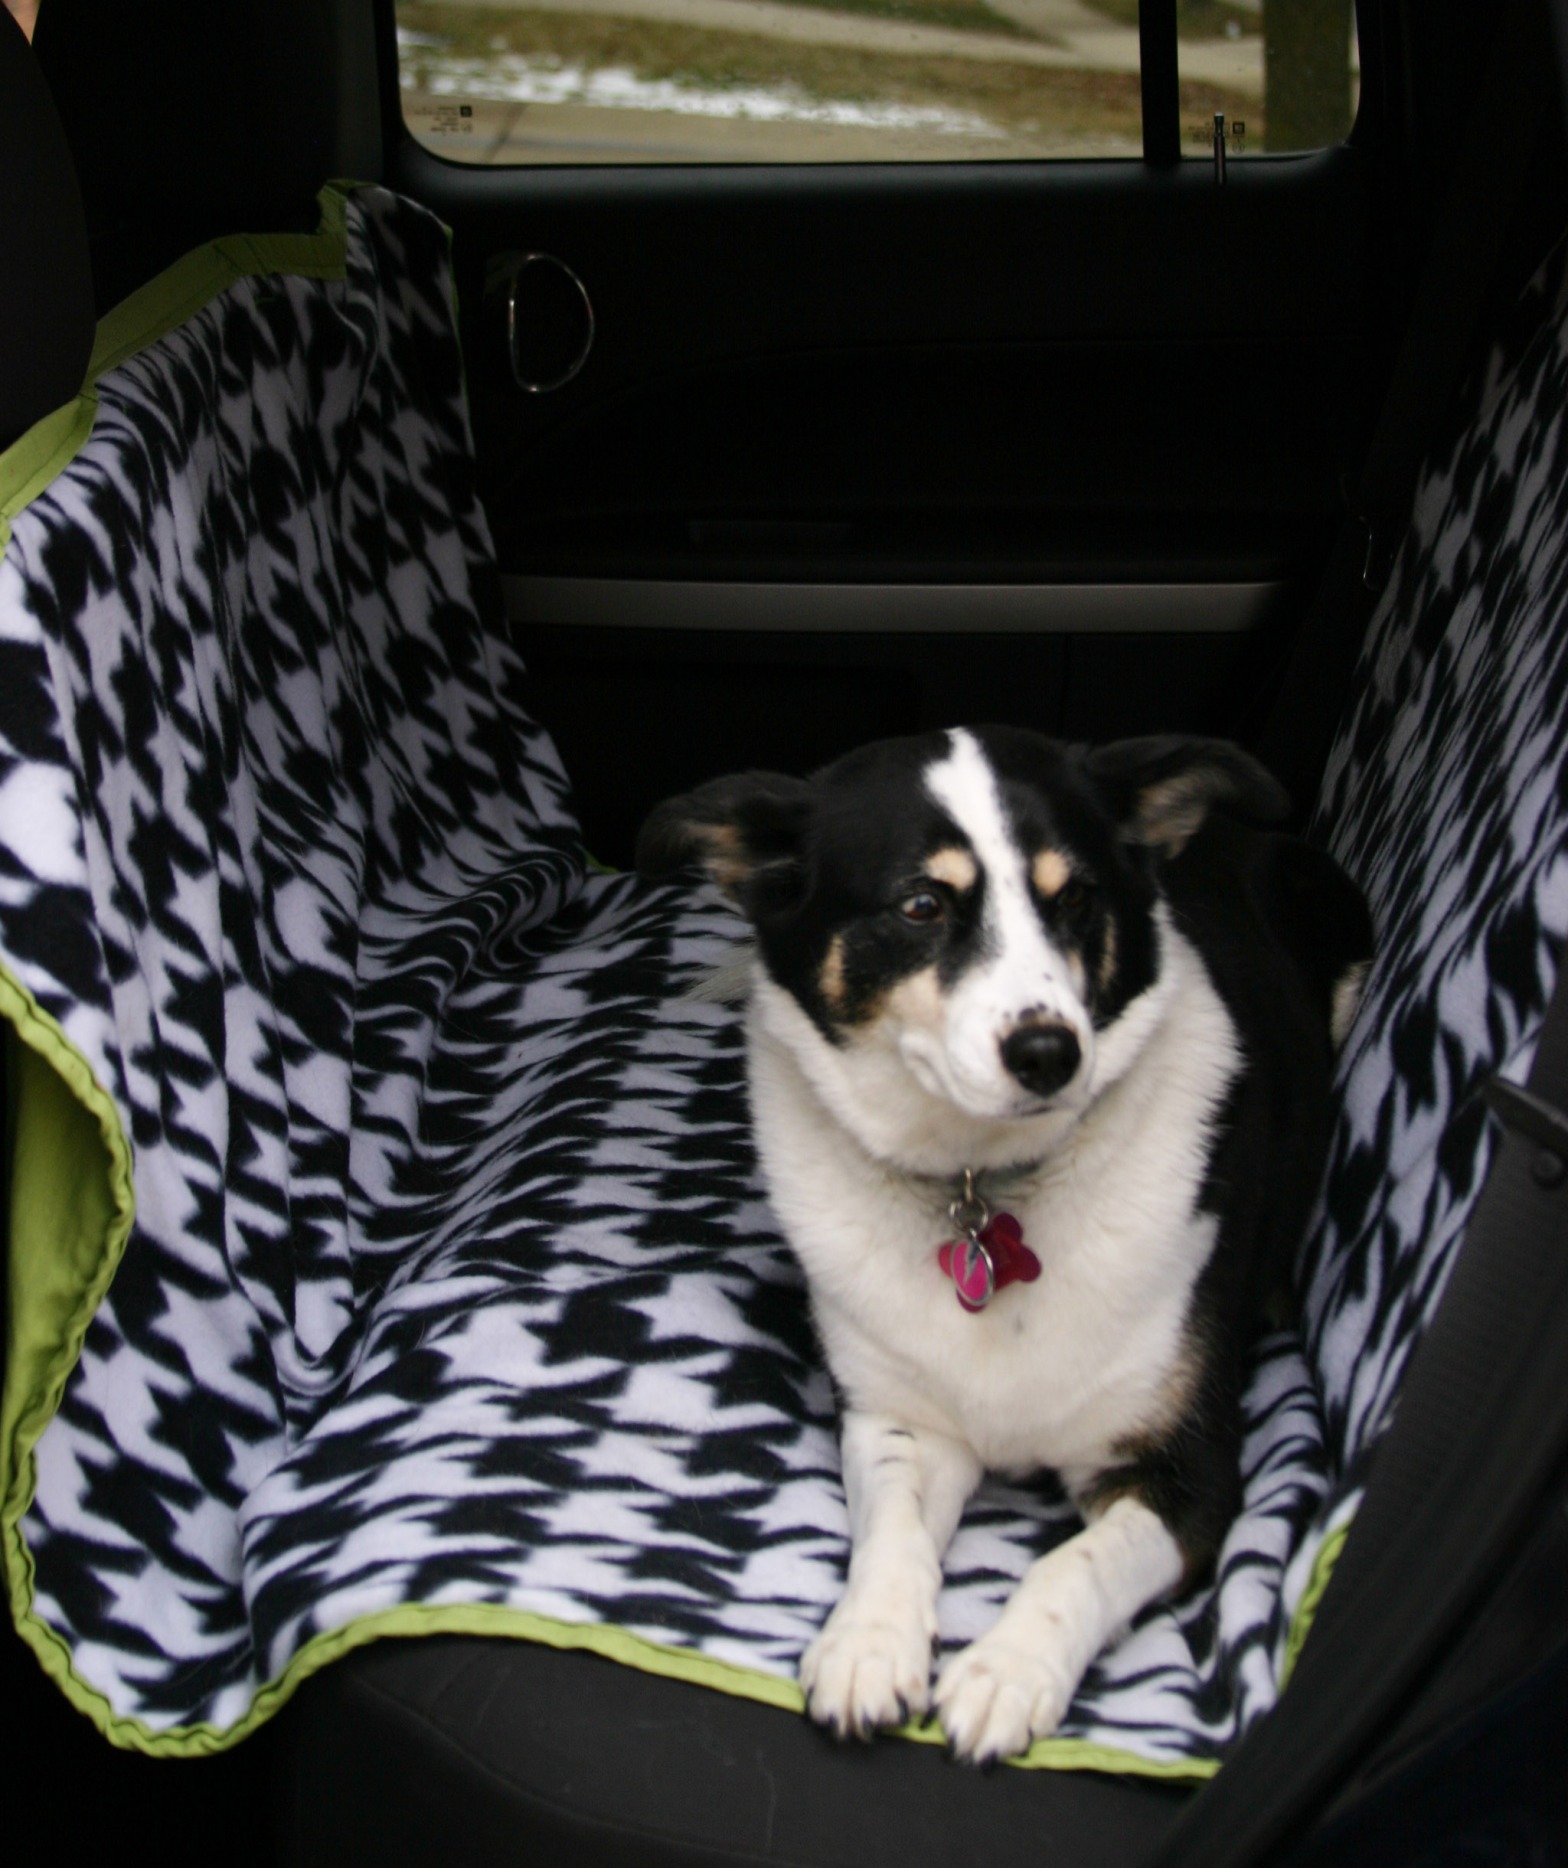 Orvis Grip-Tight Quilted Dog Throw Couch Cover Review - Paw of